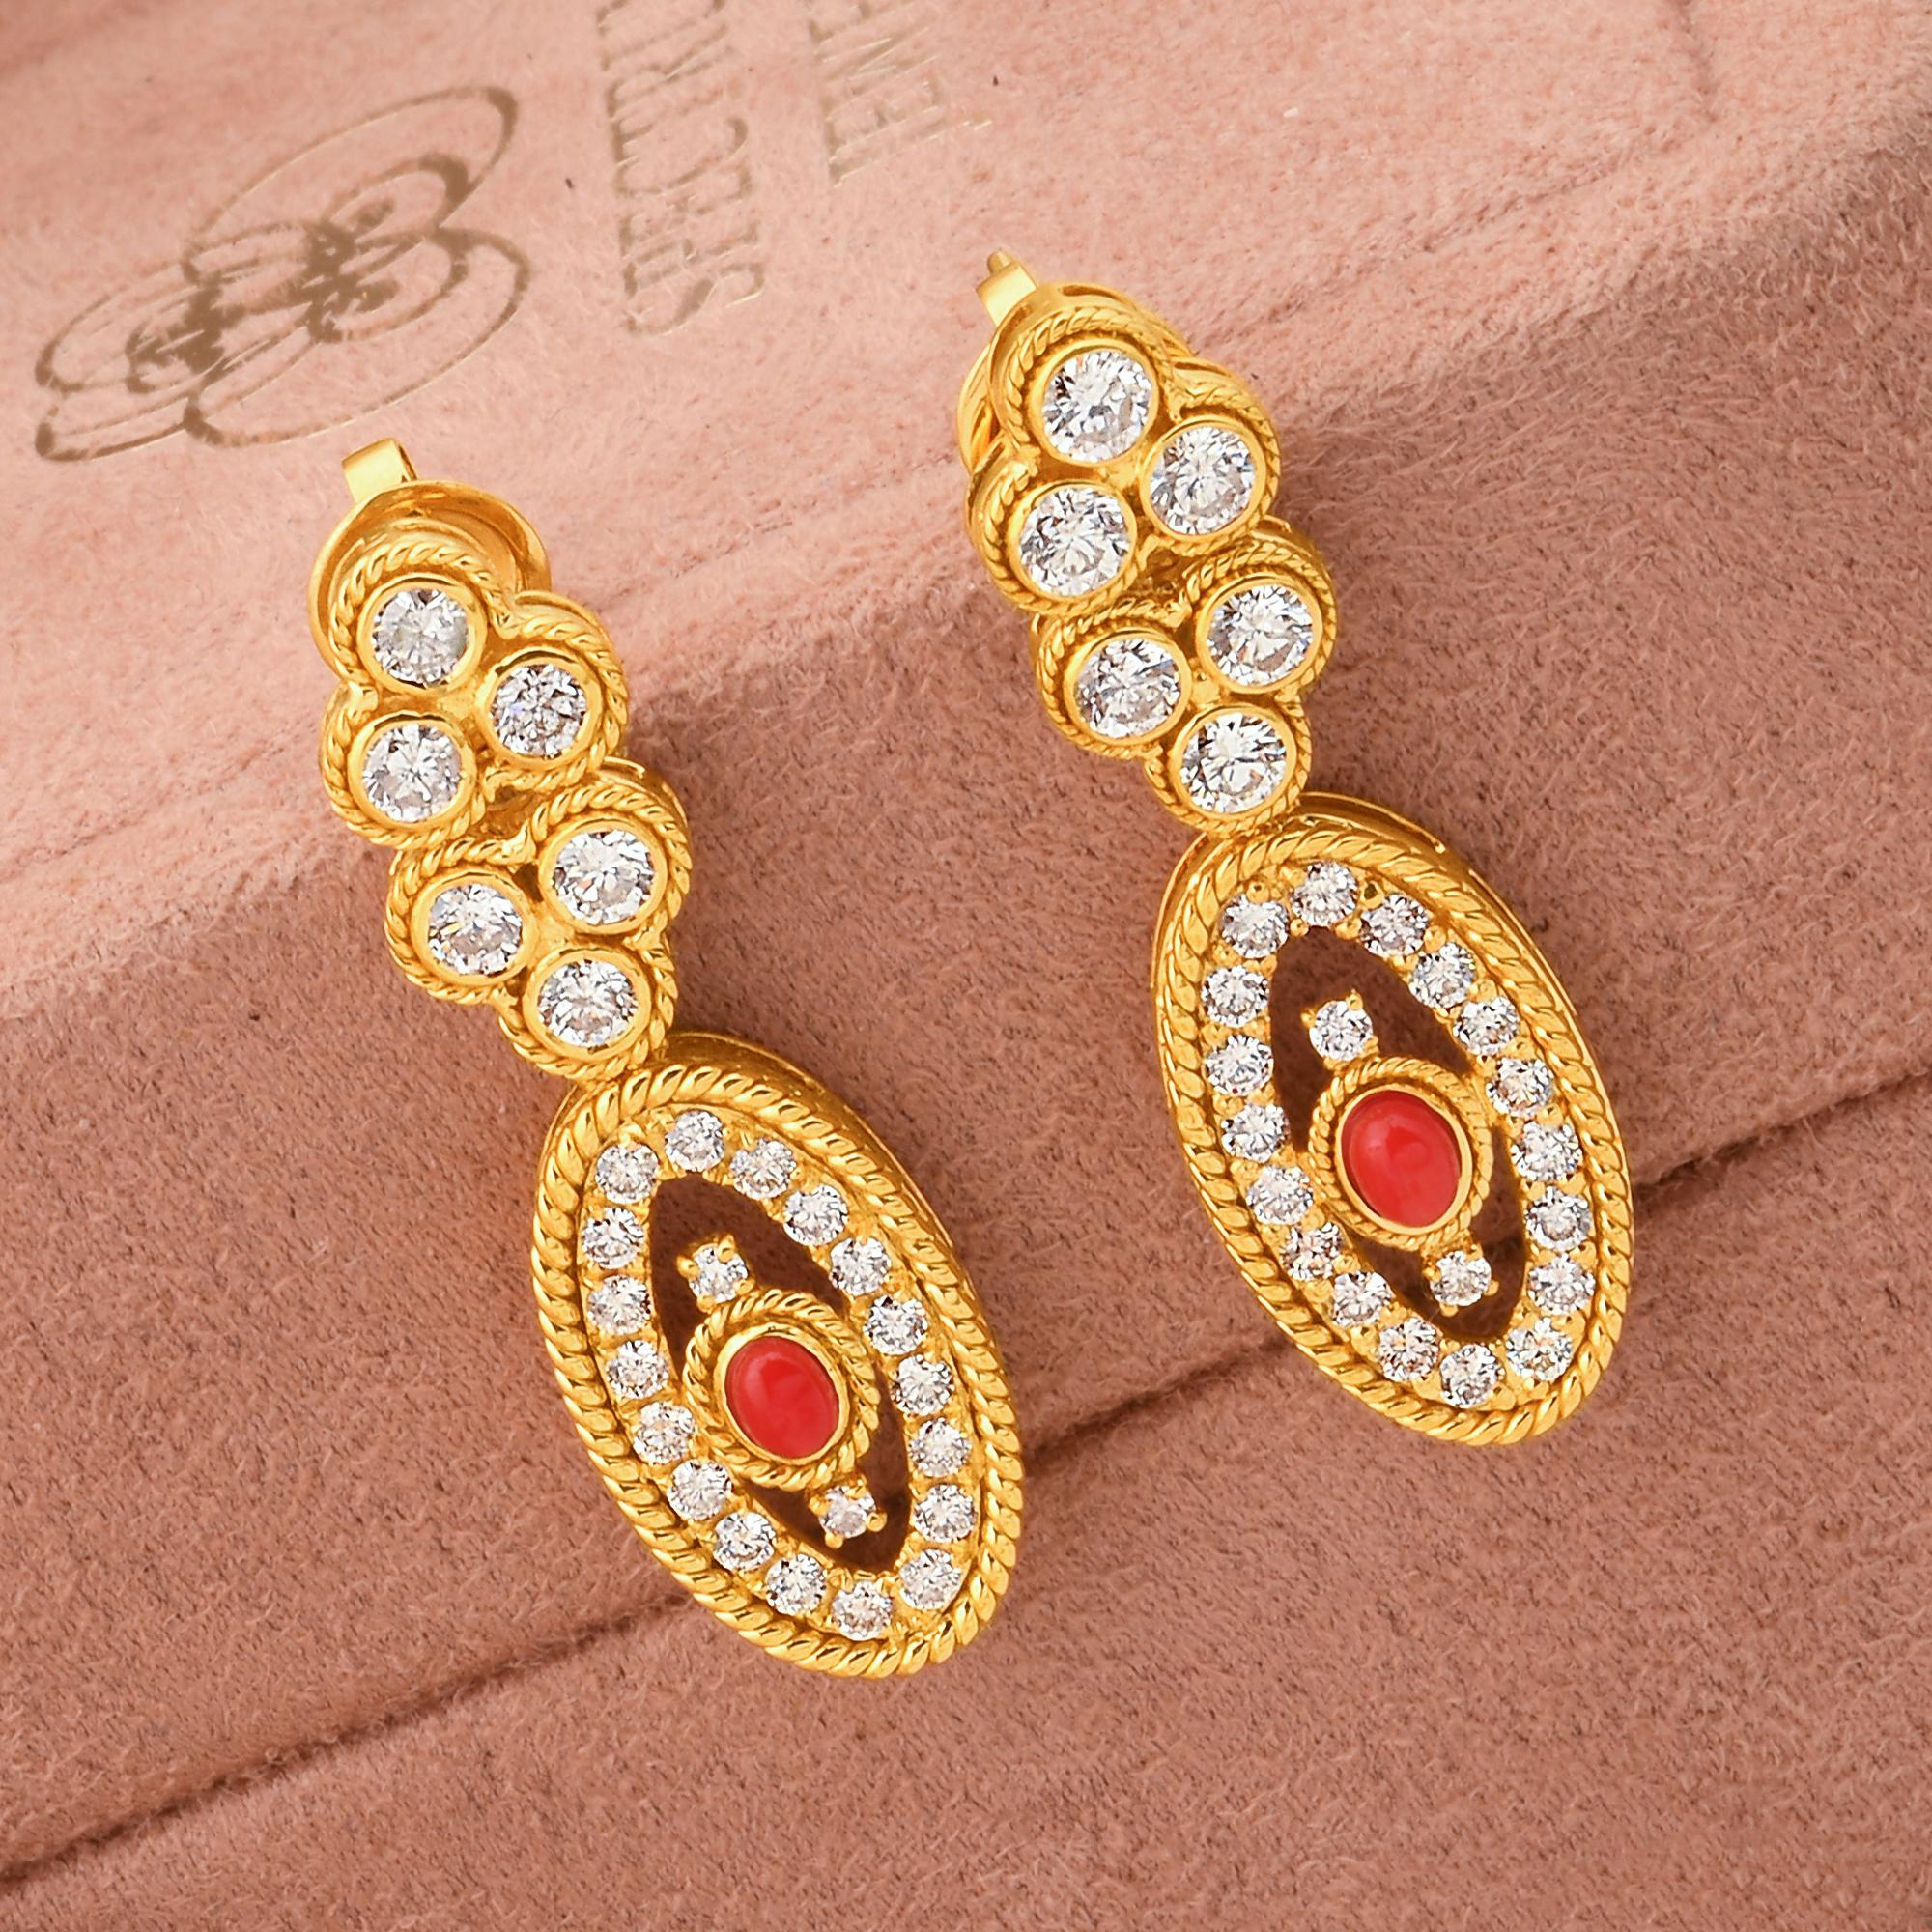 Item Code :- CN-16790A
Gross Wt. :- 11.11 gm
18k Yellow Gold Wt. :- 10.71 gm
Natural Diamond Wt. :- 1.60 Ct. ( AVERAGE DIAMOND CLARITY SI1-SI2 & COLOR H-I )
Coral Wt. :- 0.40 Ct.
Earrings Size :- 38 mm approx.

✦ Sizing
.....................
We can